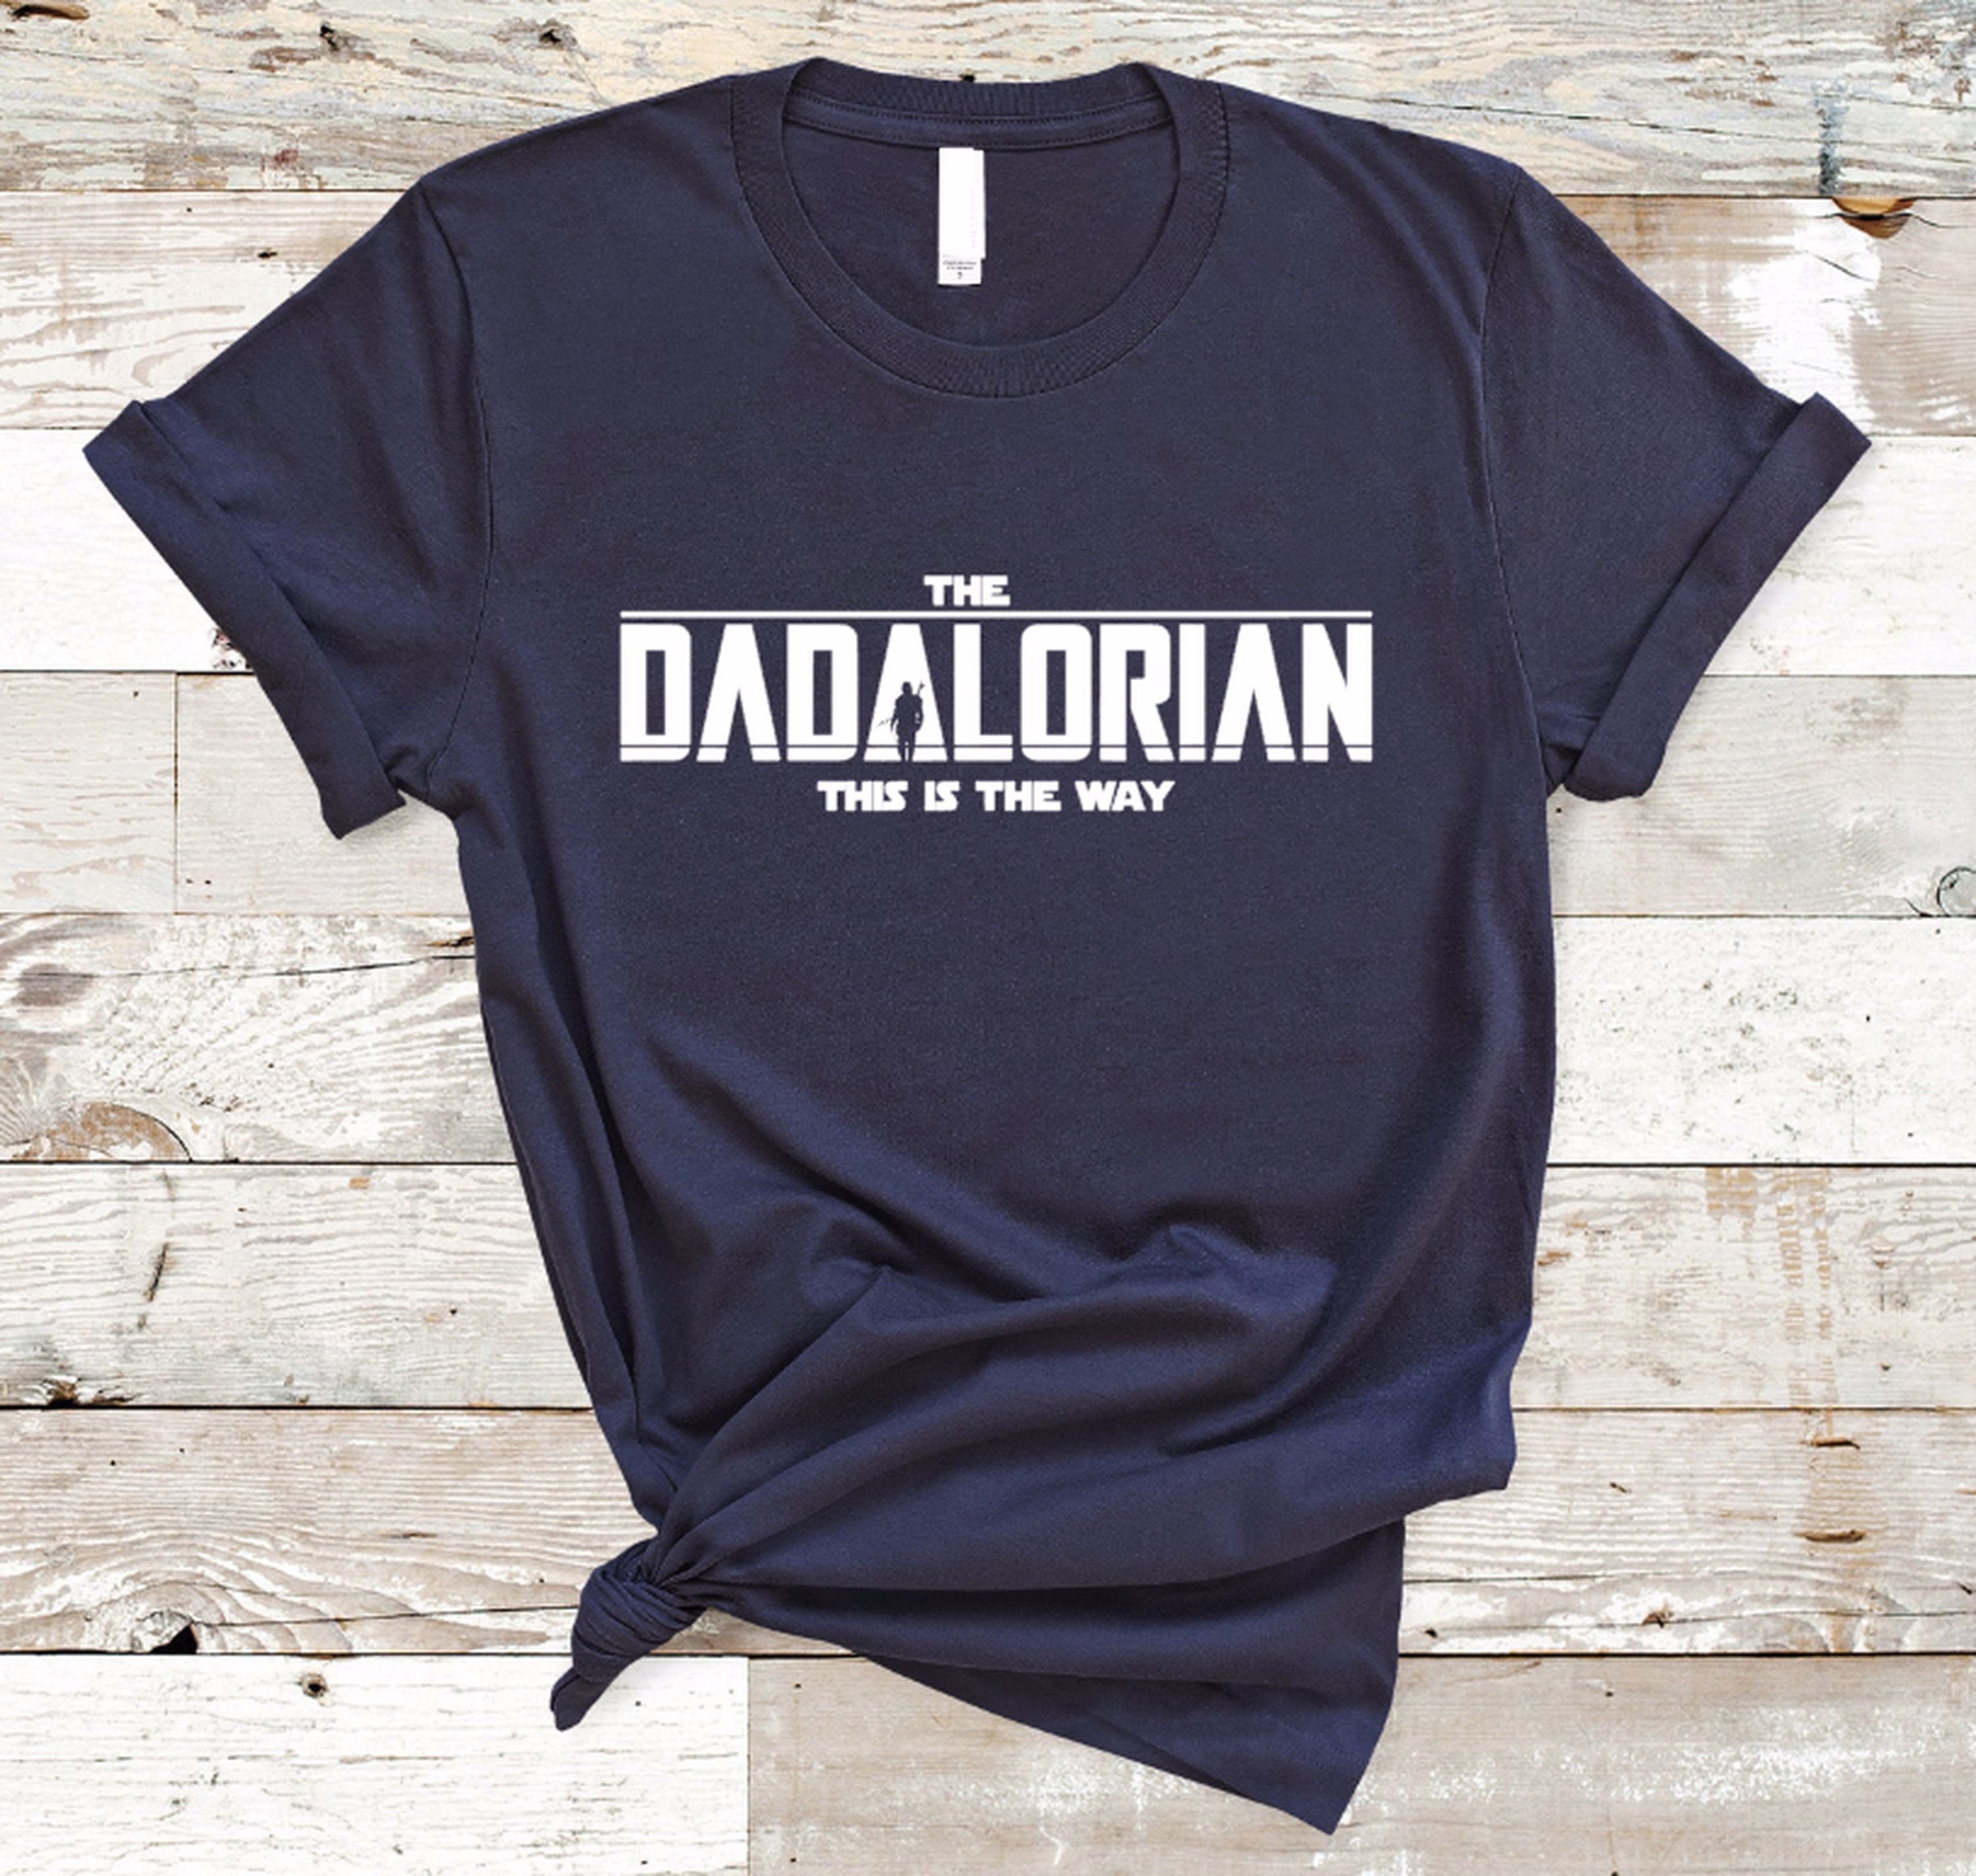 Gift for Dad The Dadalorian Shirt Funny Dad Shirt This Is The Way Shirt Father's Gift Star Wars Shirt Happy Father's Day Shirt HCc155